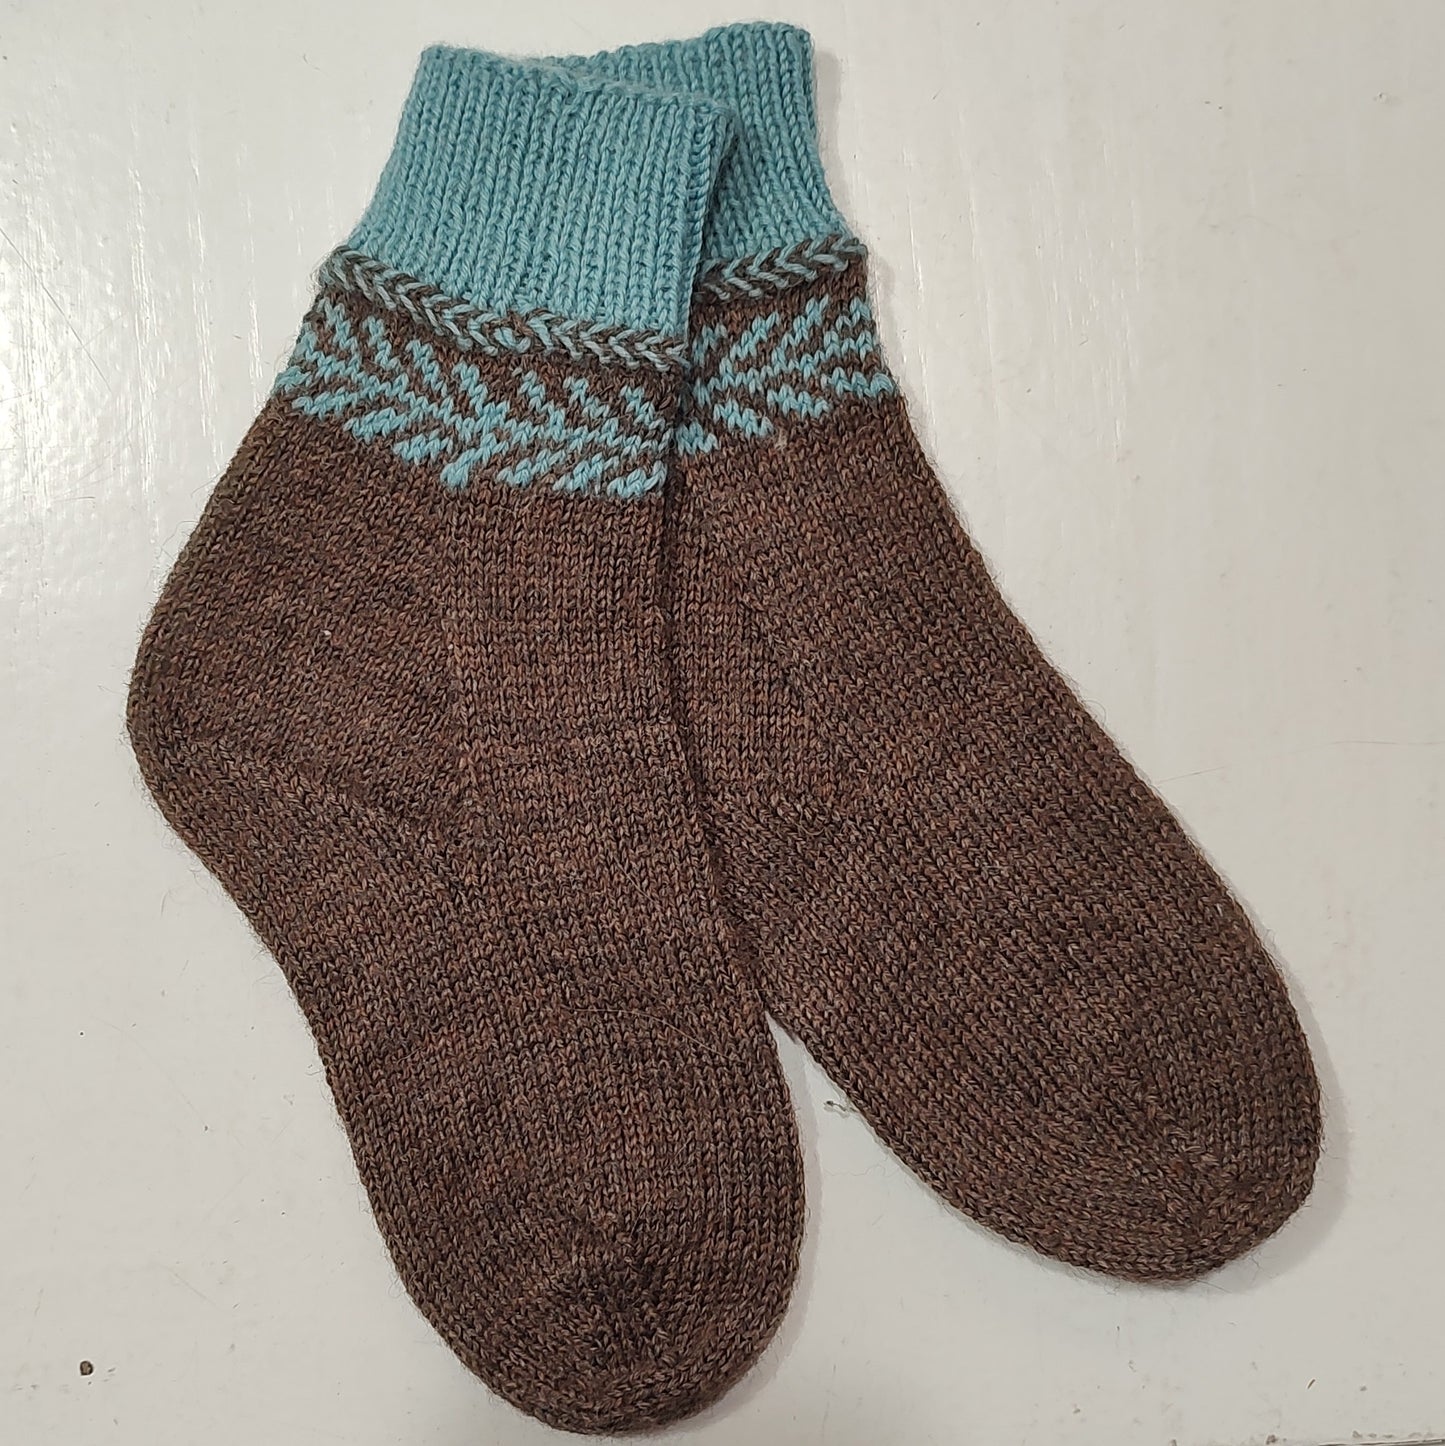 Knitted Socks - colourwork, approximately size 4-5